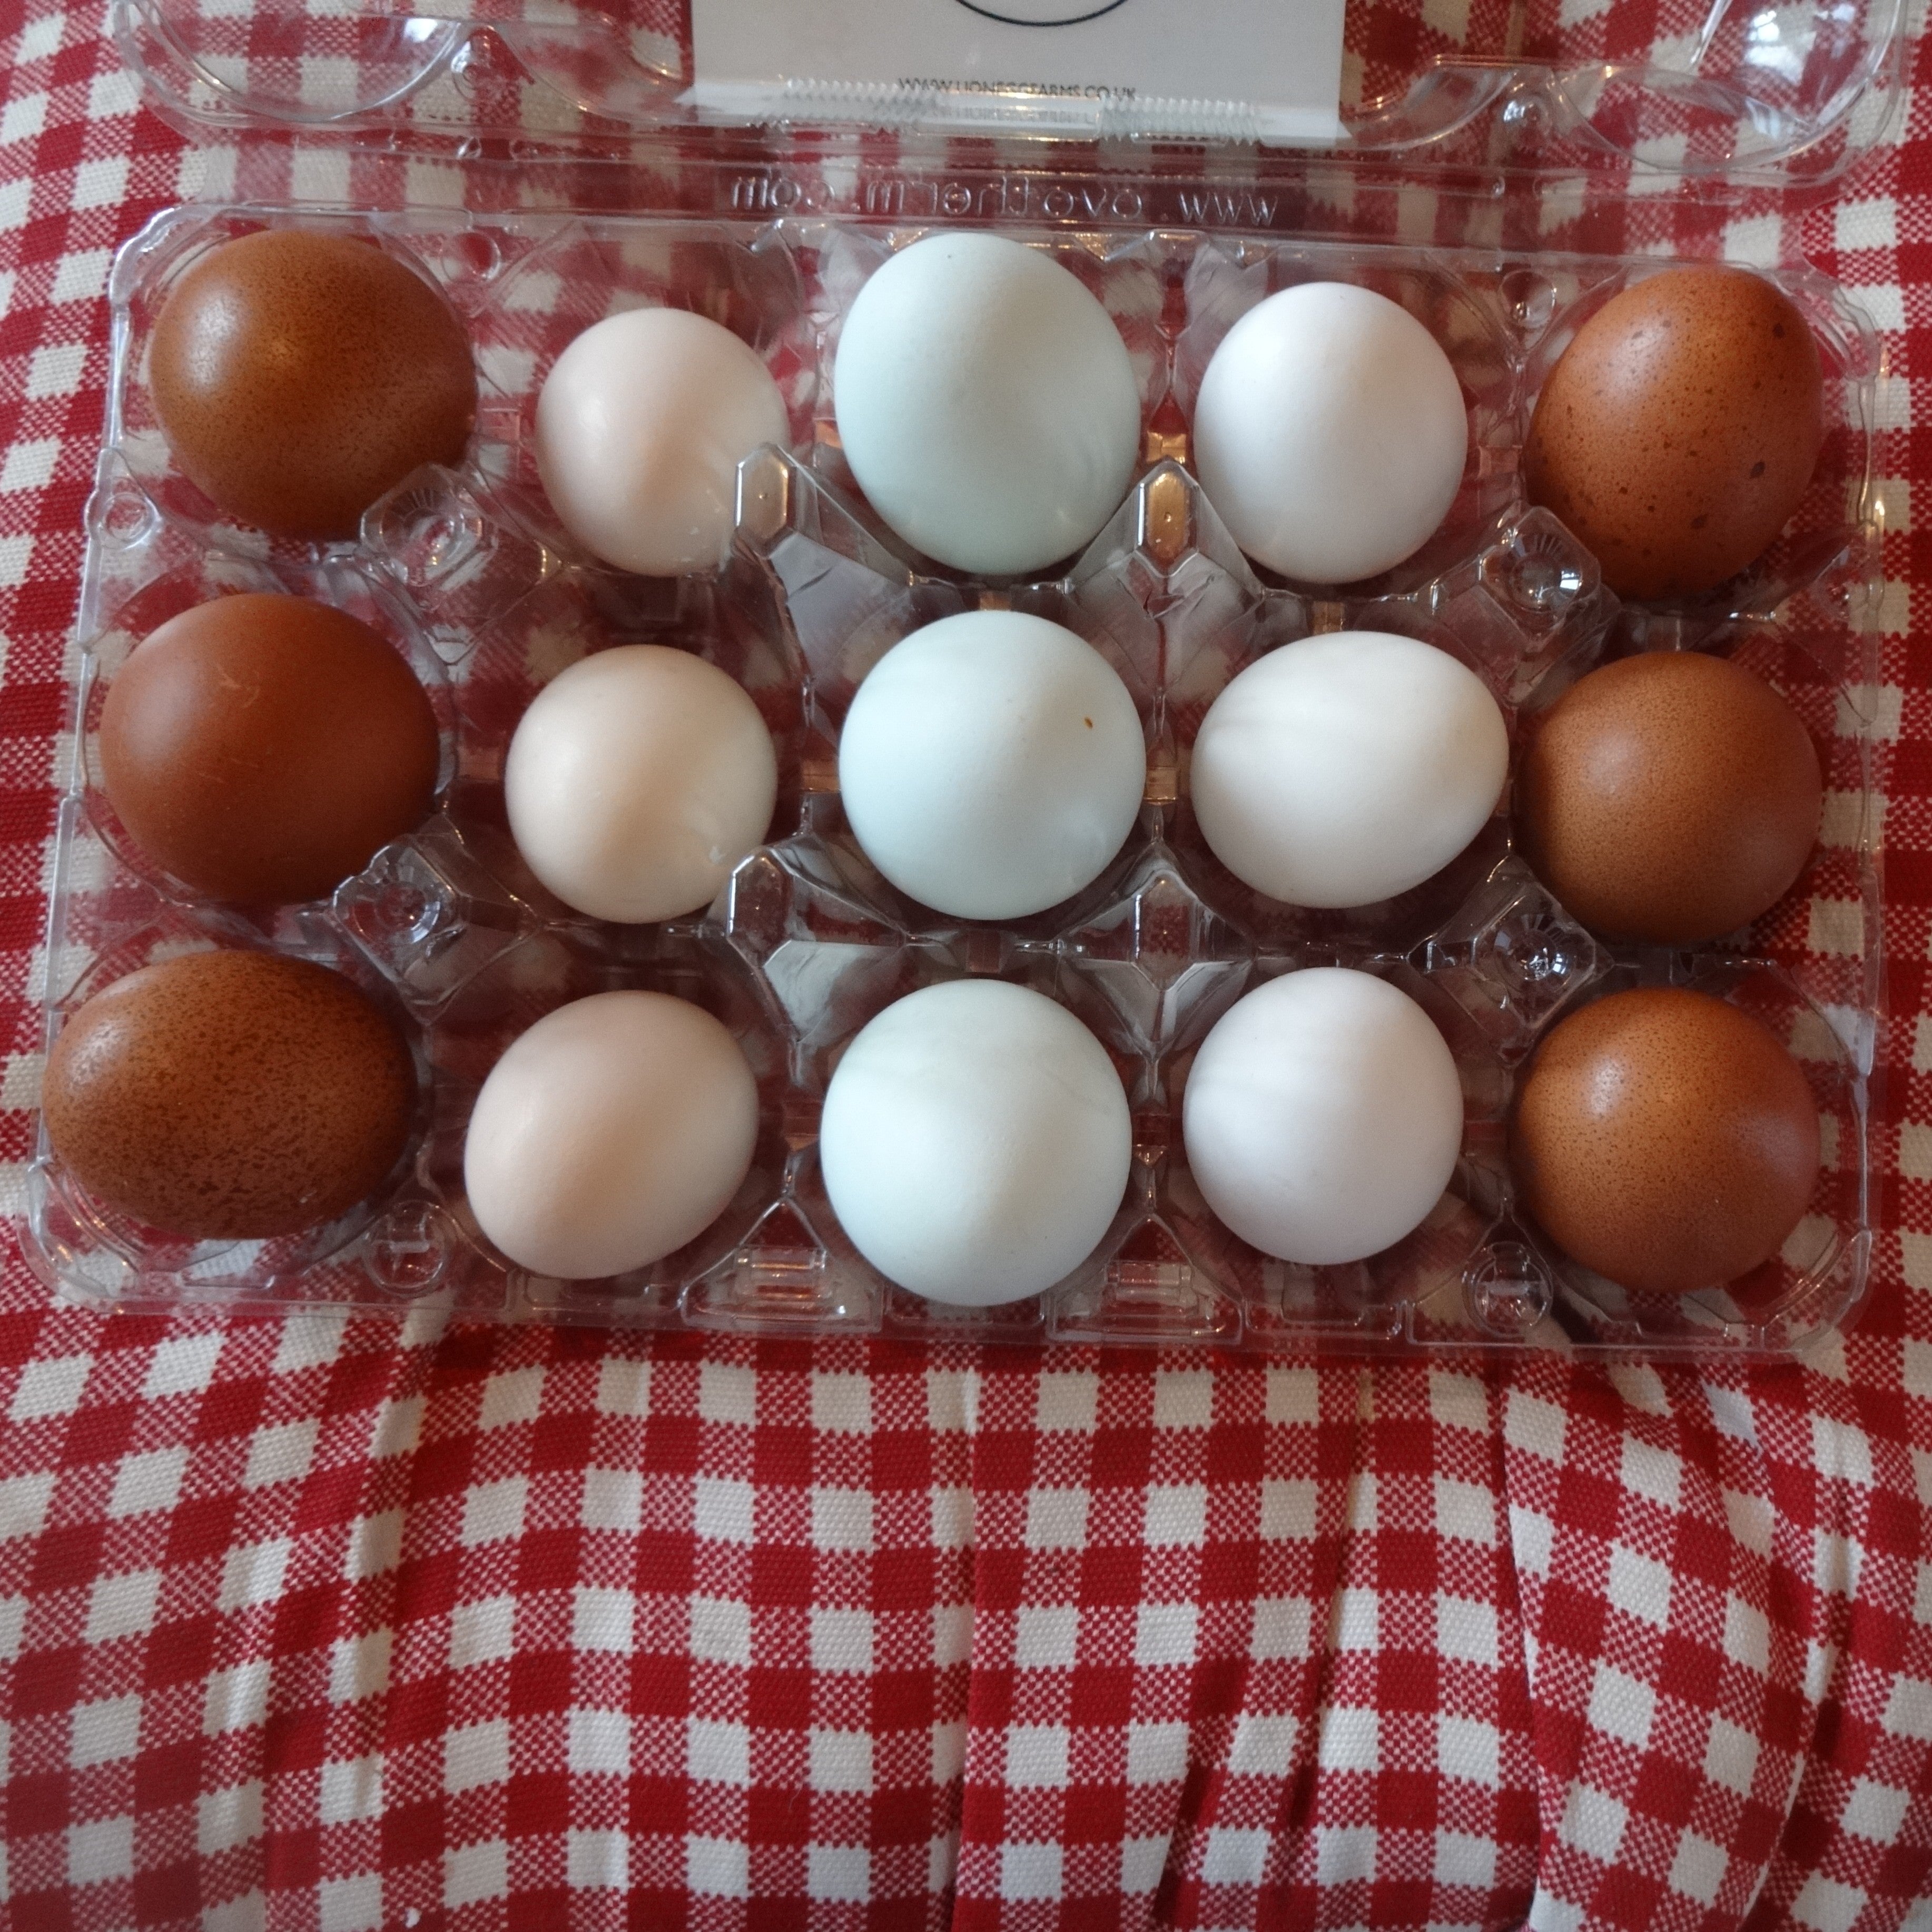 a chicken lays the same shaped egg each time, varying only in size as the bird gets older